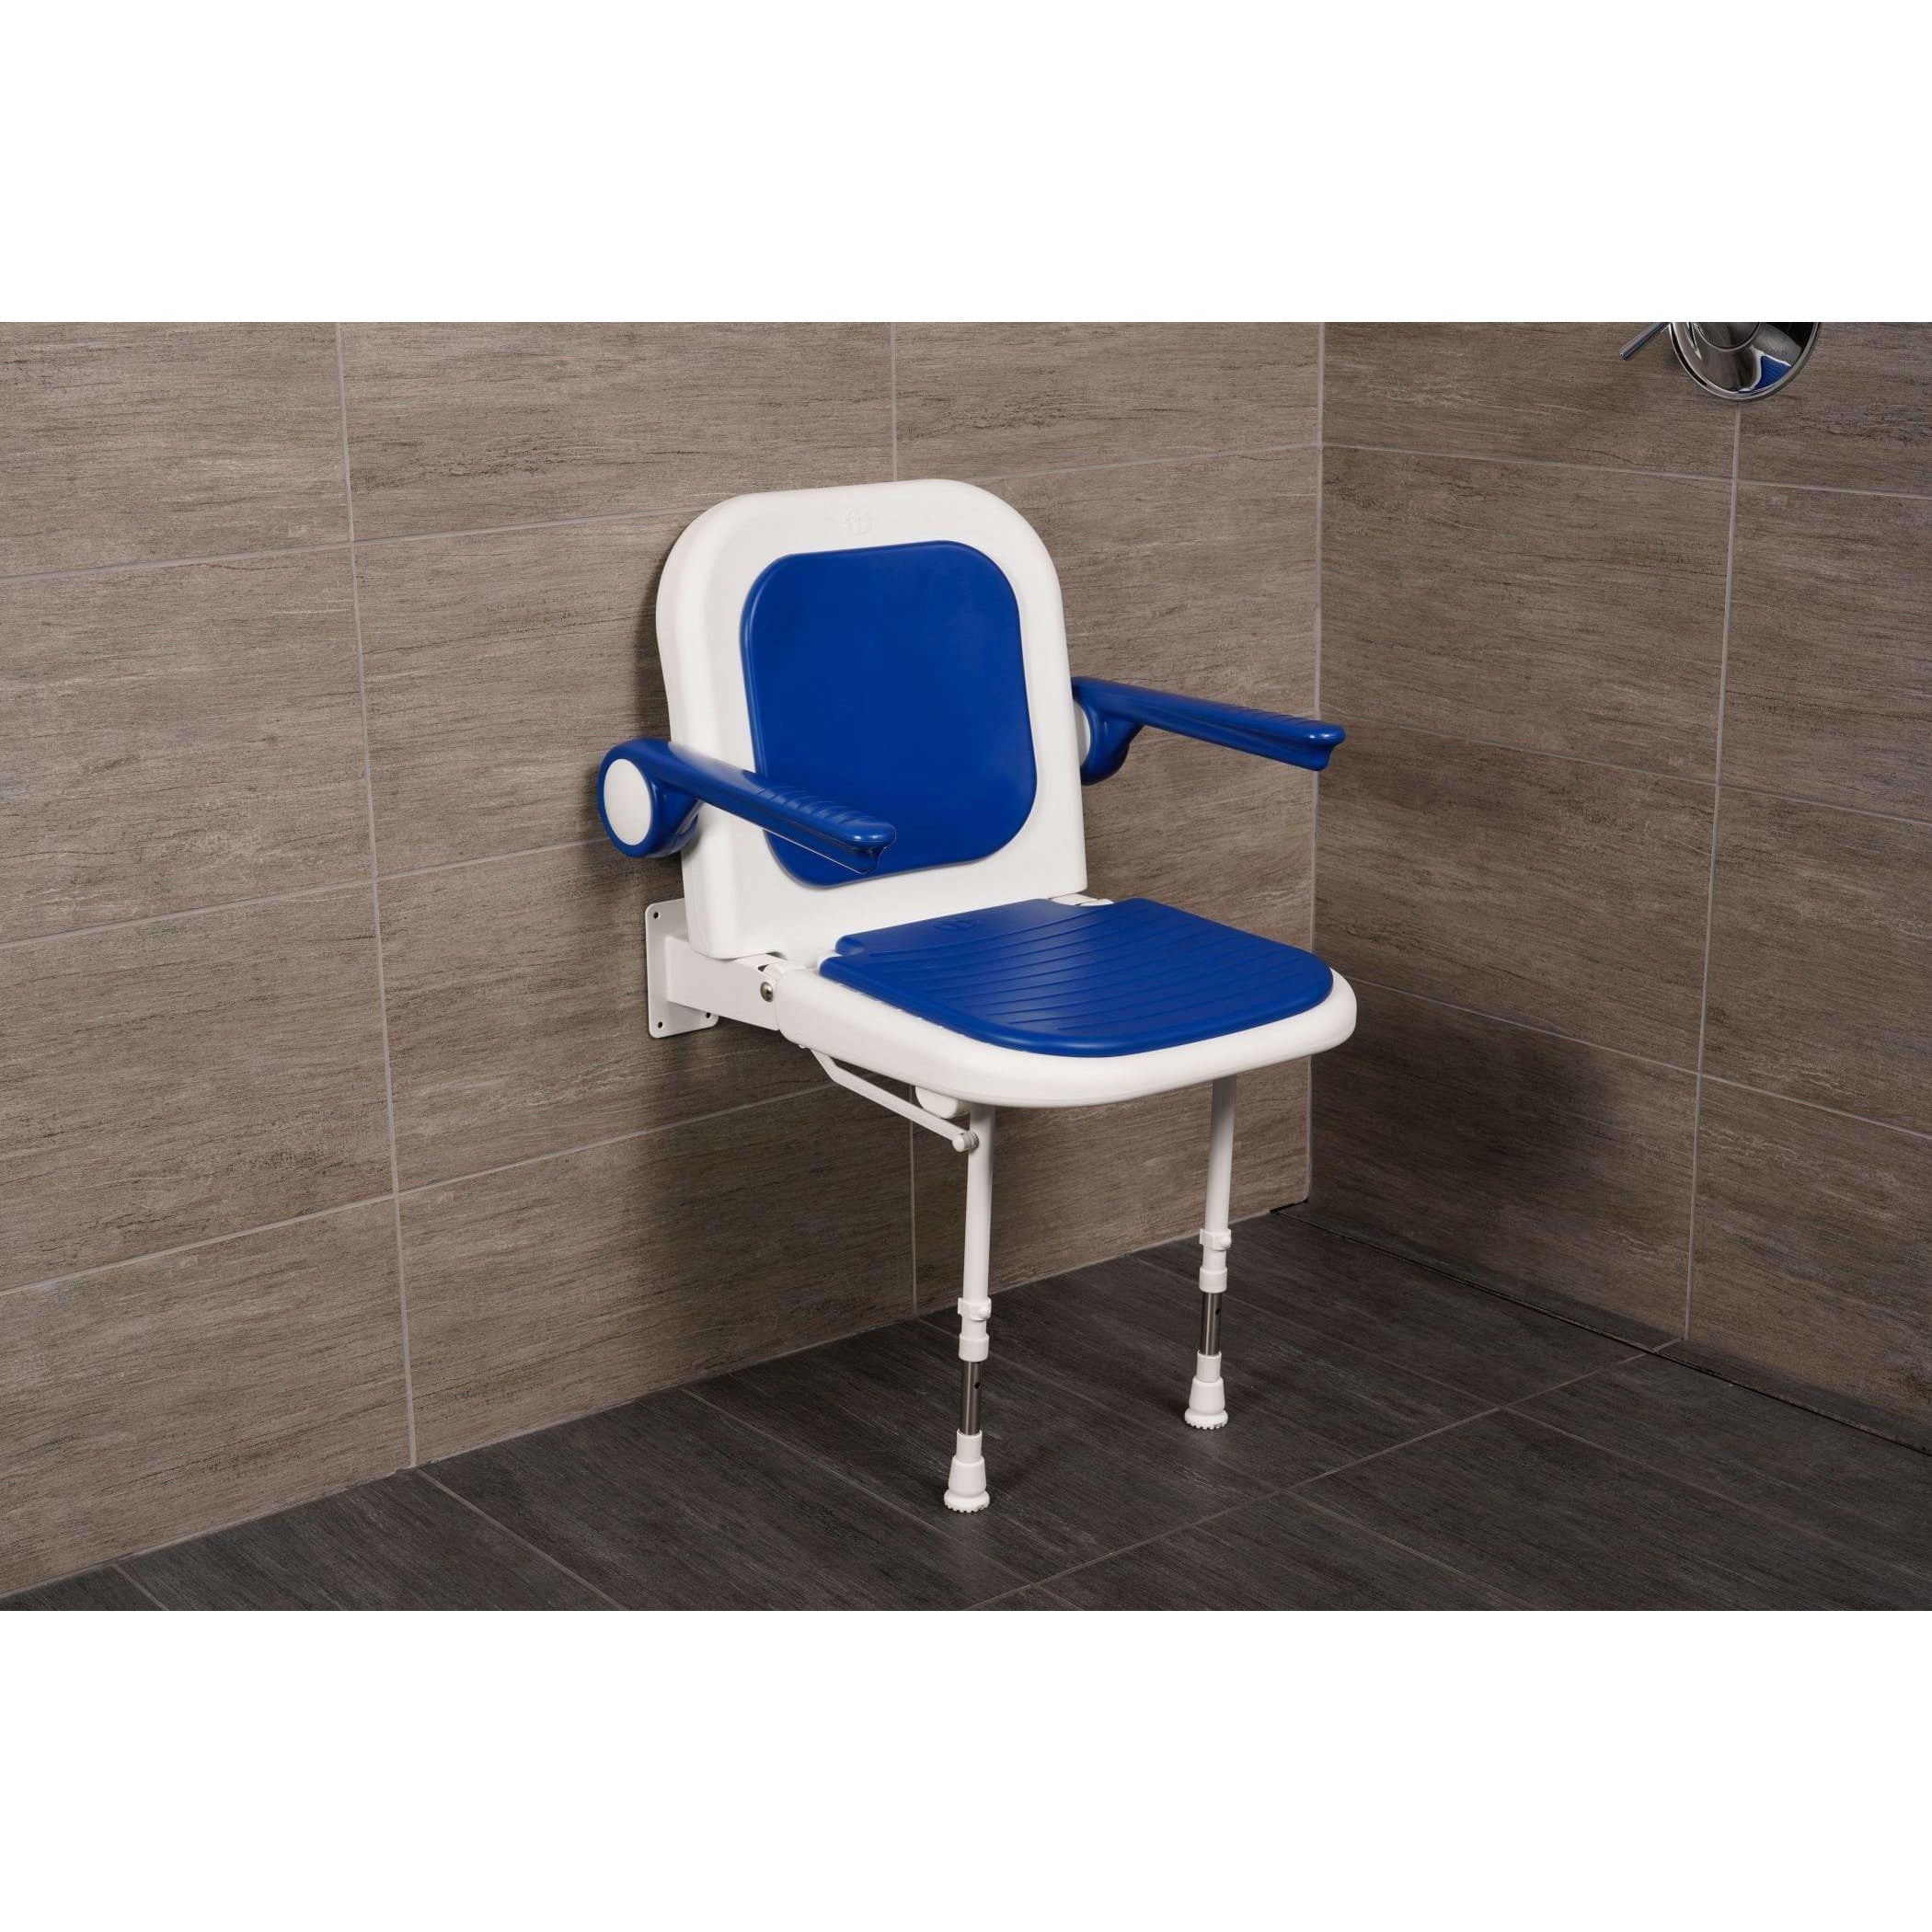 Arc First 4000 Series 19" Wide Folding Shower Seat with Back & Arms, Blue Pads 04130P